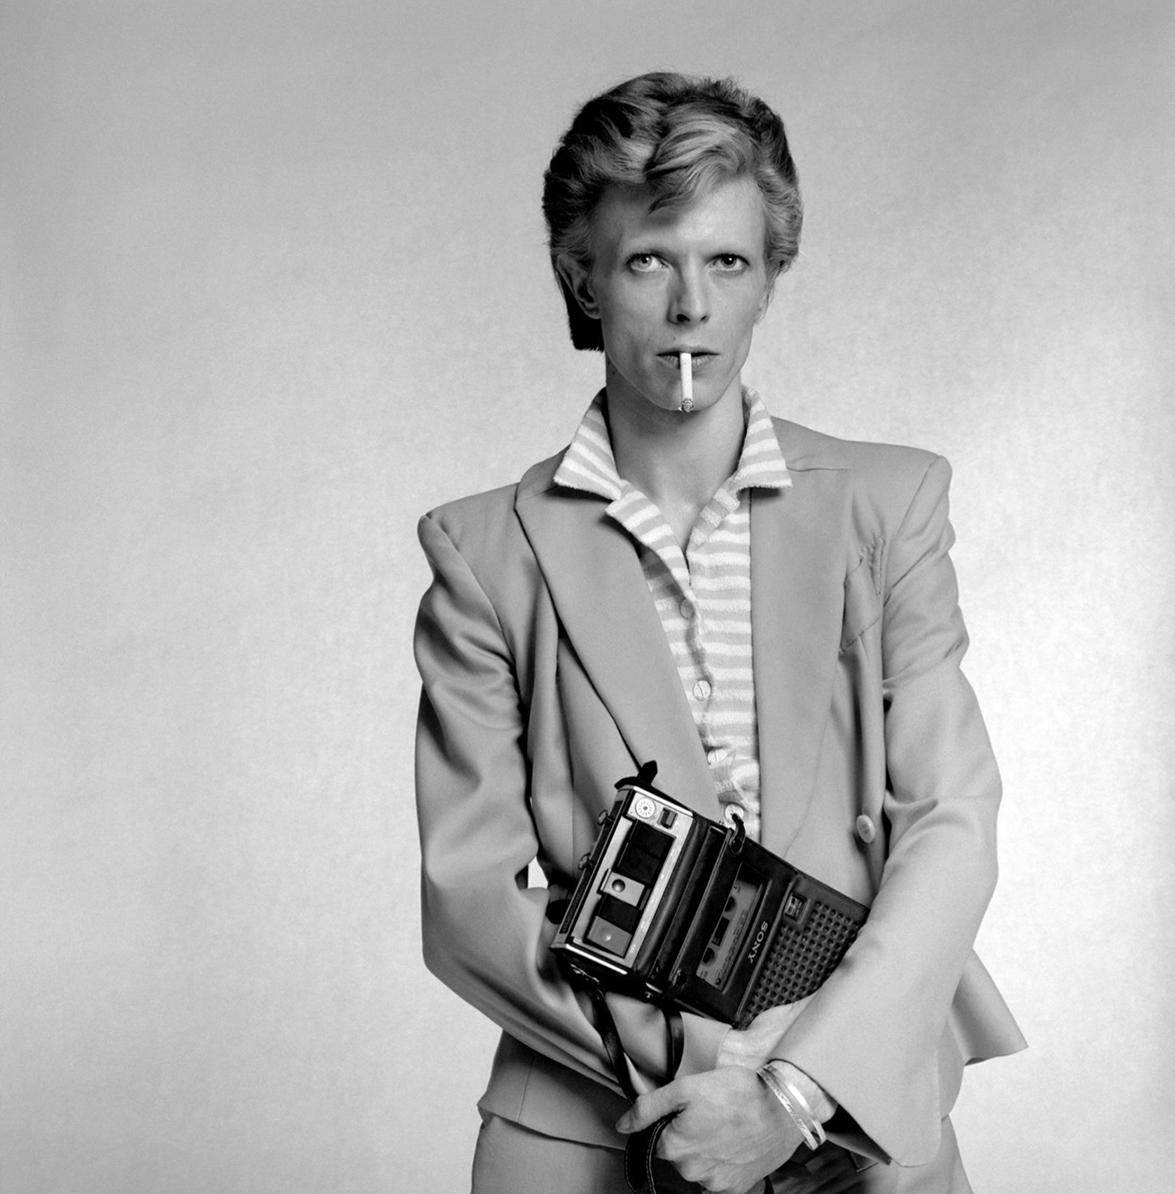 Terry O'Neill Portrait Photograph - David Bowie holds a cassette player, 1974 by Terry O’Neill